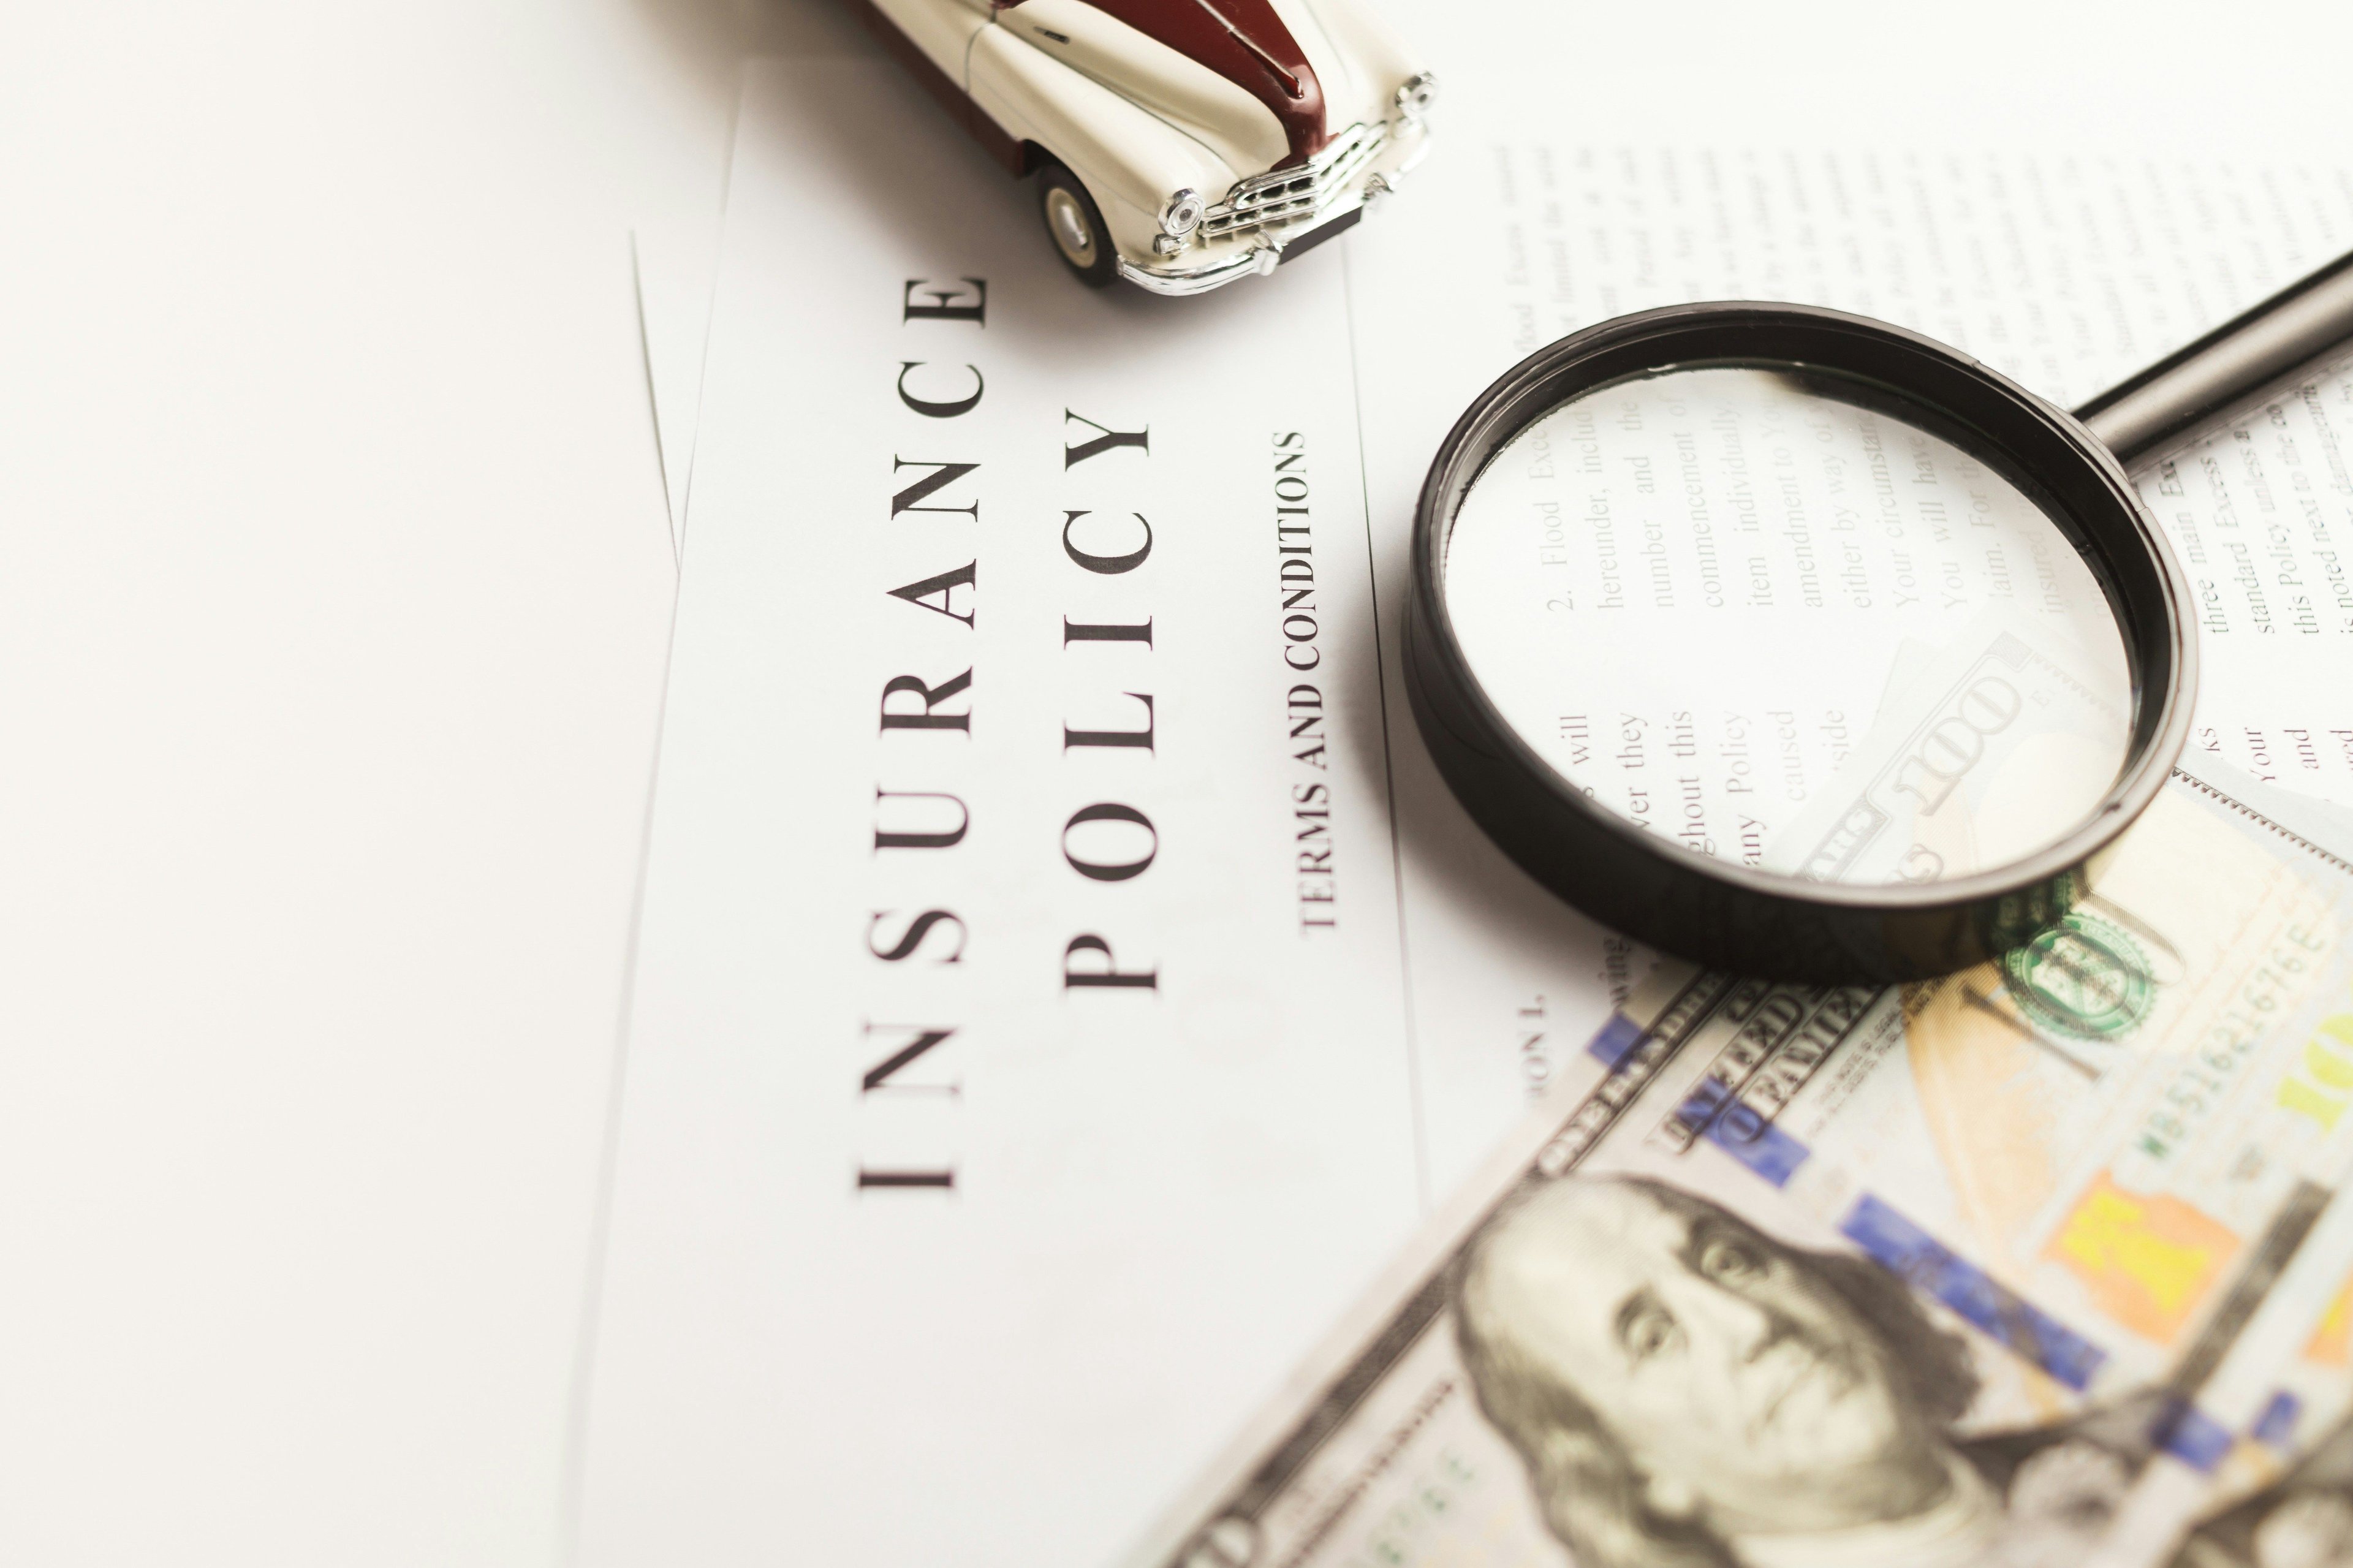 Magnifying glass on top of an insurance policy document